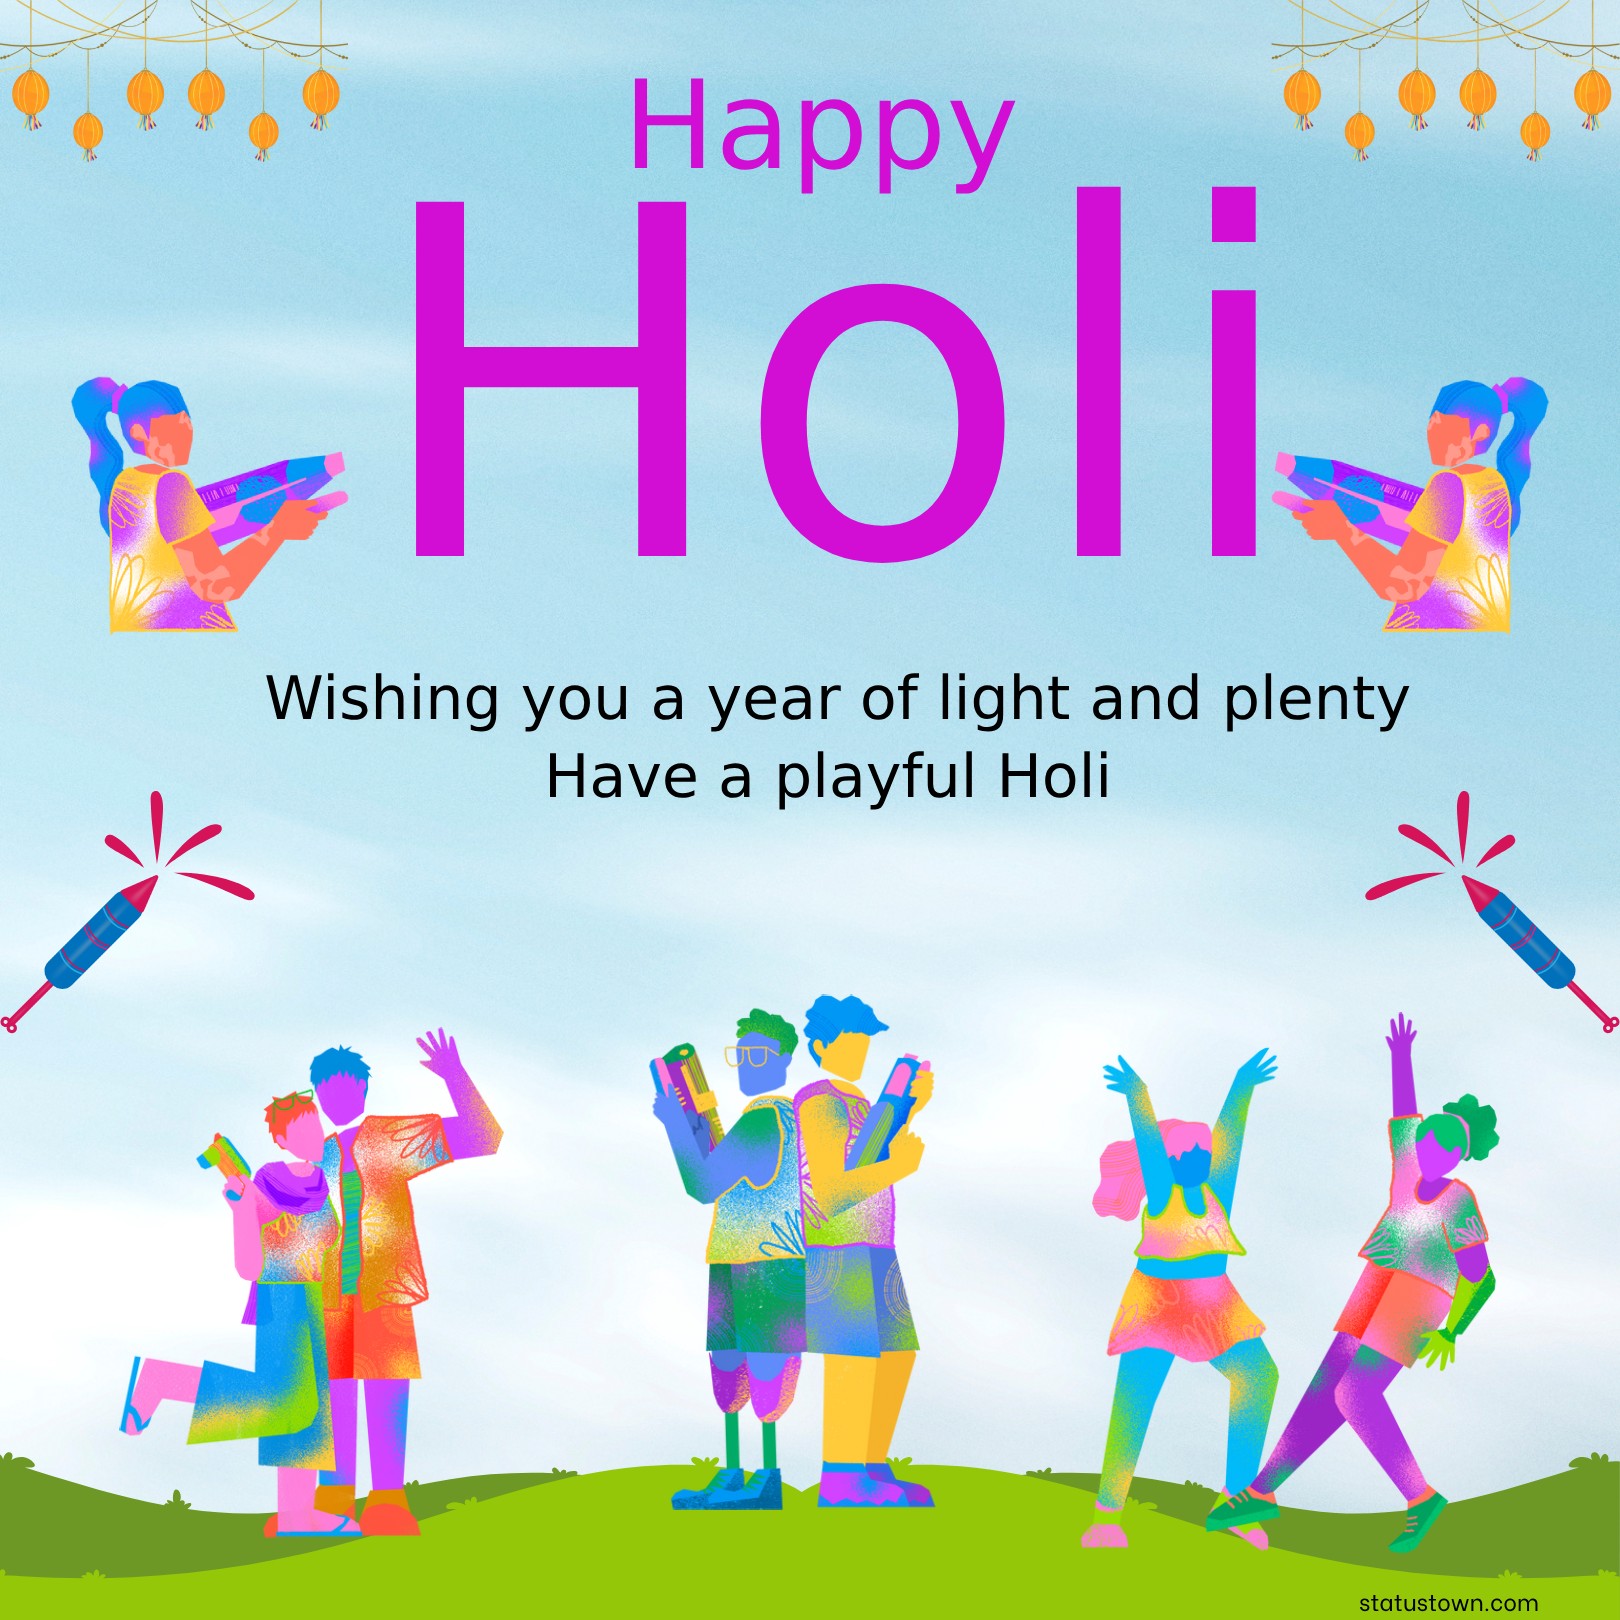 Wishing you a year of light and plenty. Have a playful Holi! - Holi Wishes wishes, messages, and status